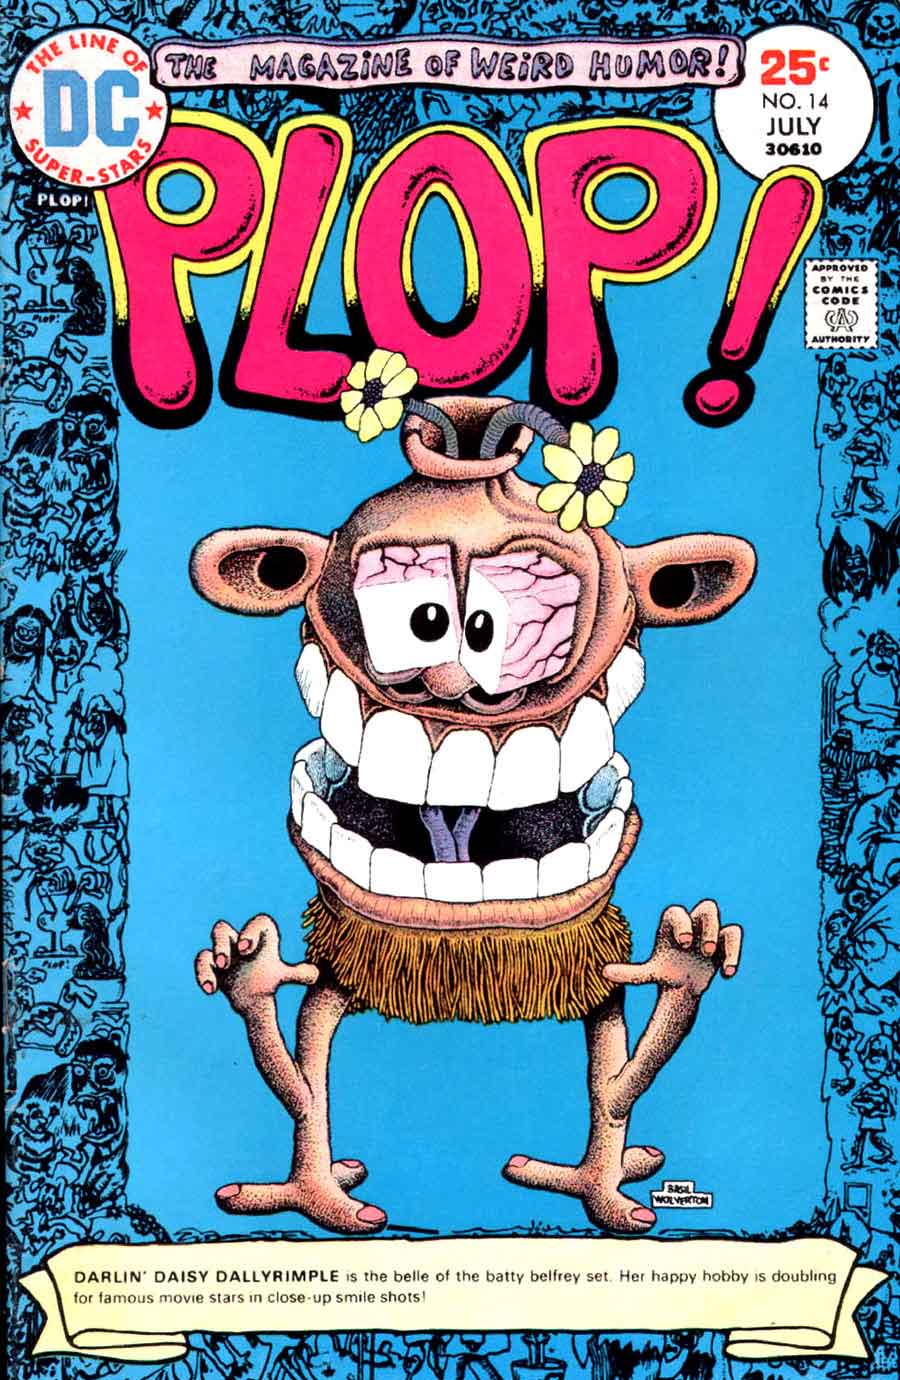 Plop v1 #14 dc 1970s bronze age comic book cover art by Basil Wolverton